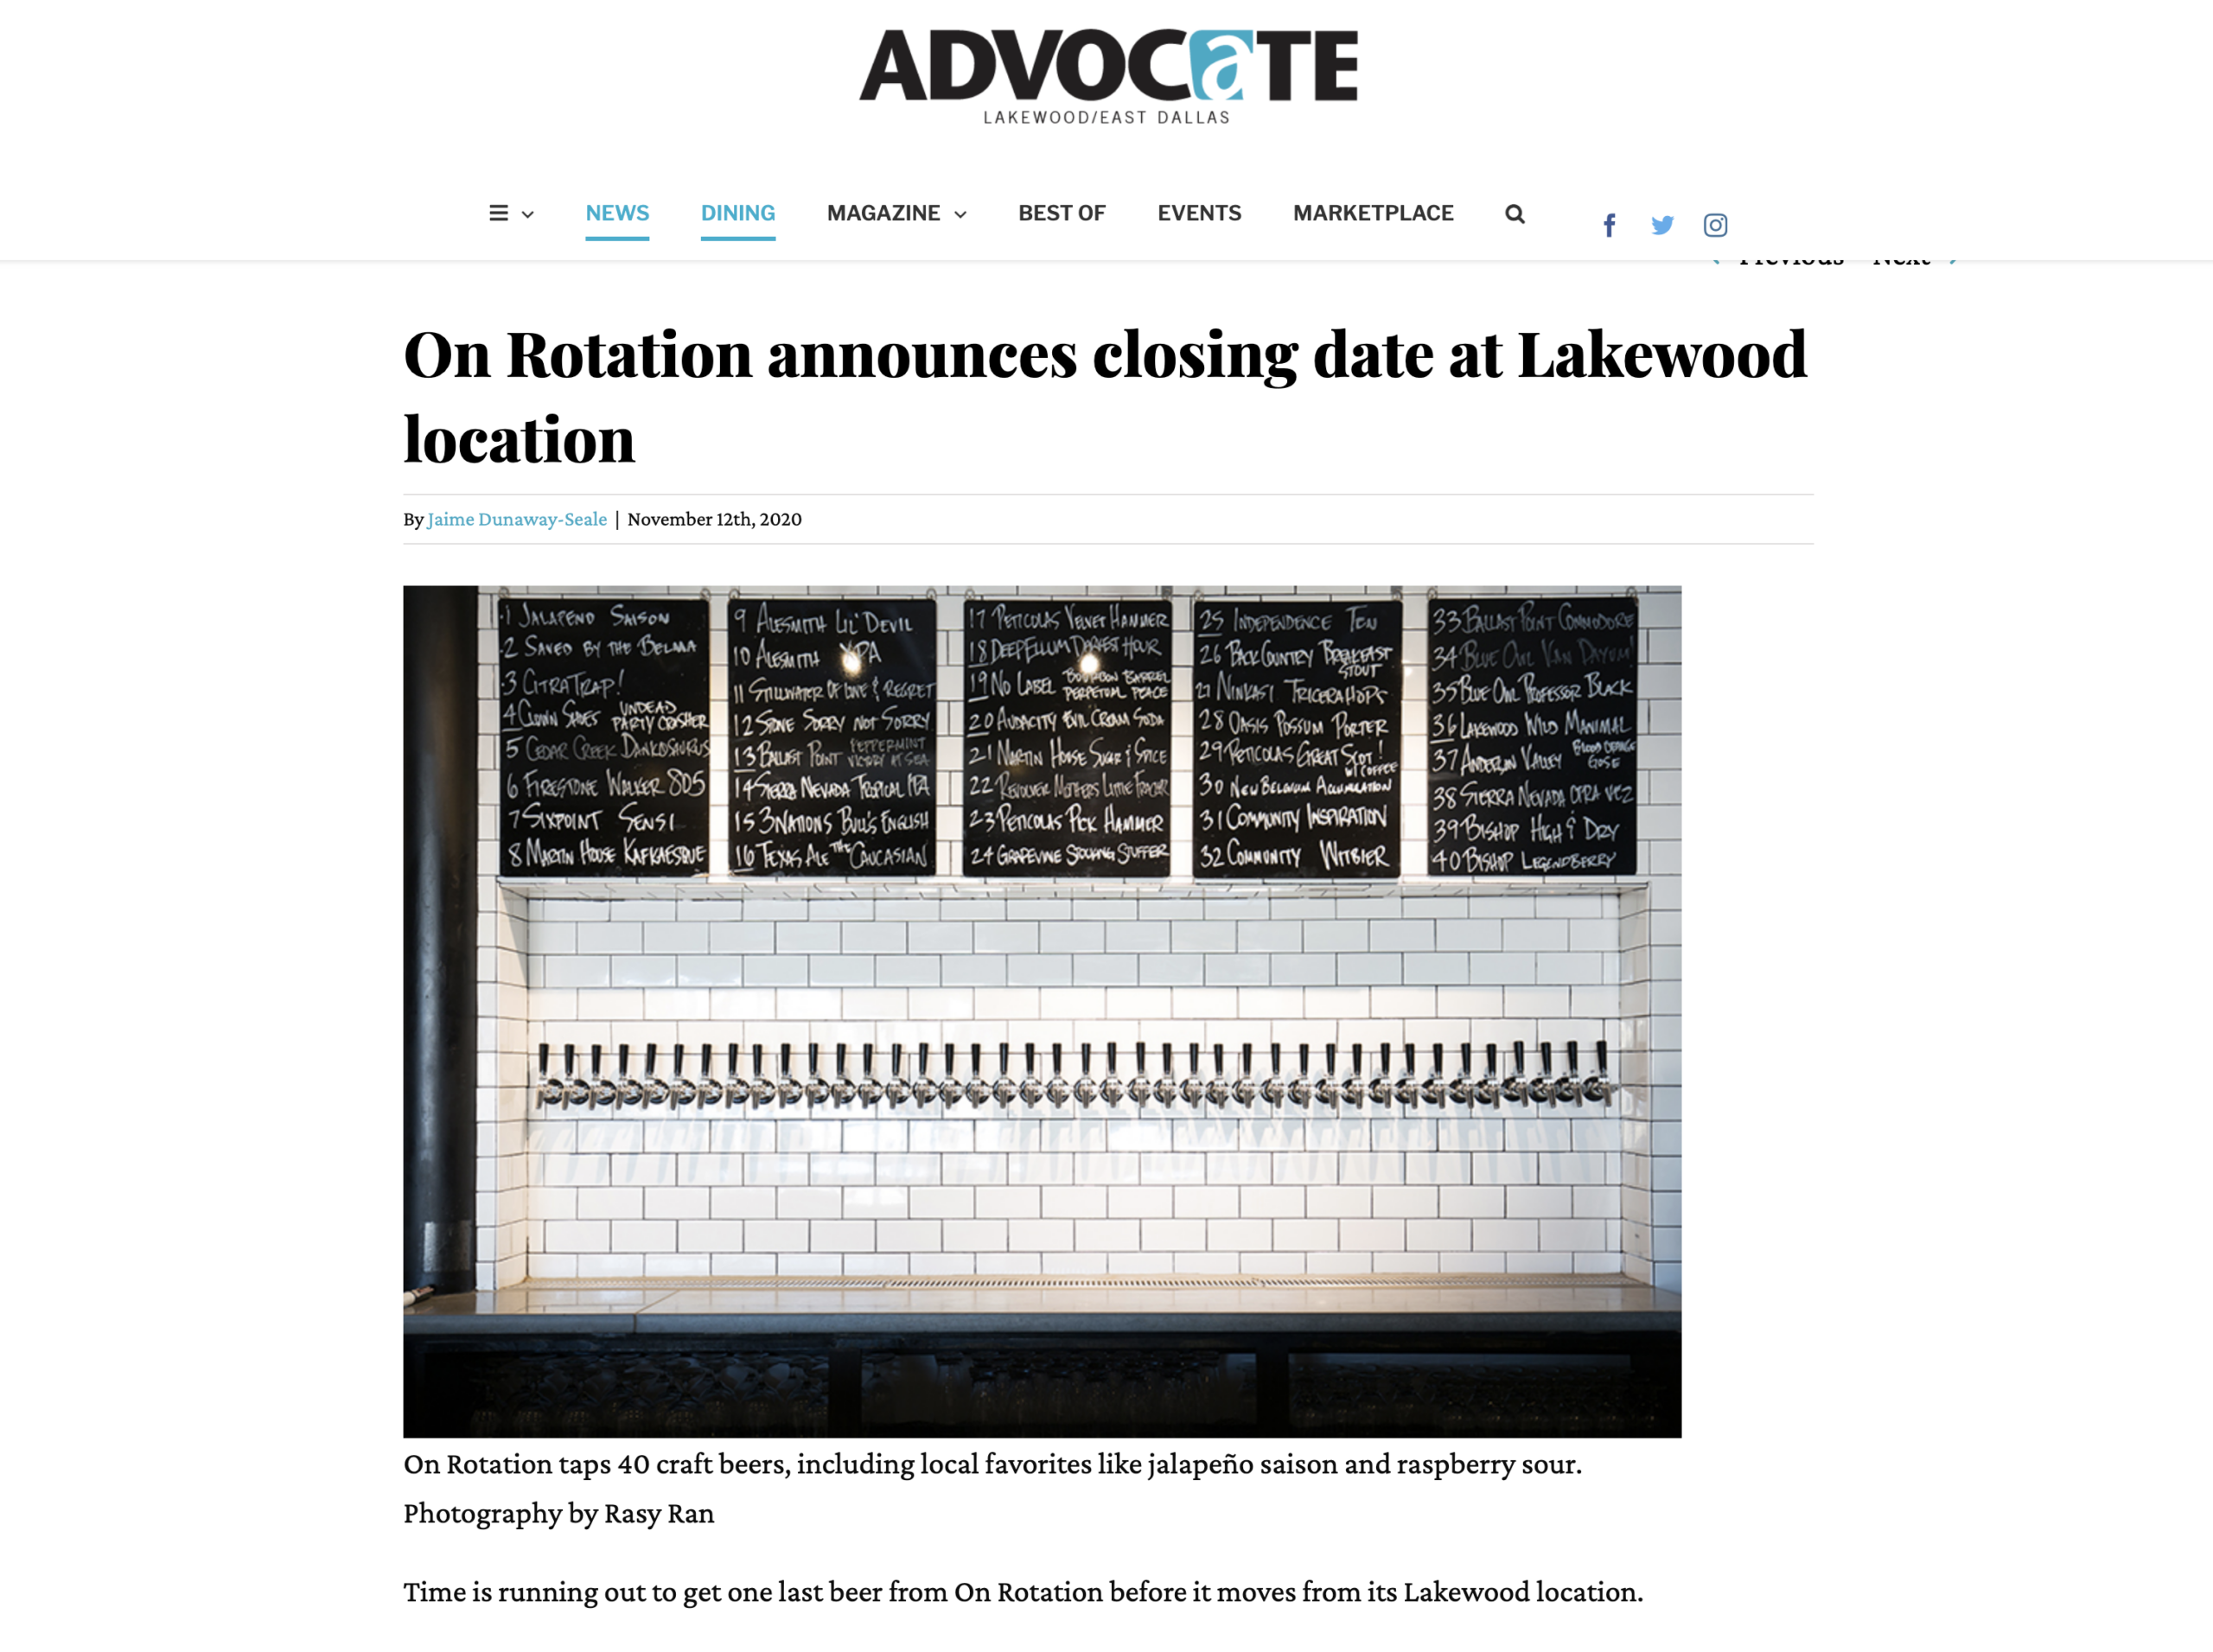 On Rotation announces closing date at Lakewood location [Lakewood Advocate]